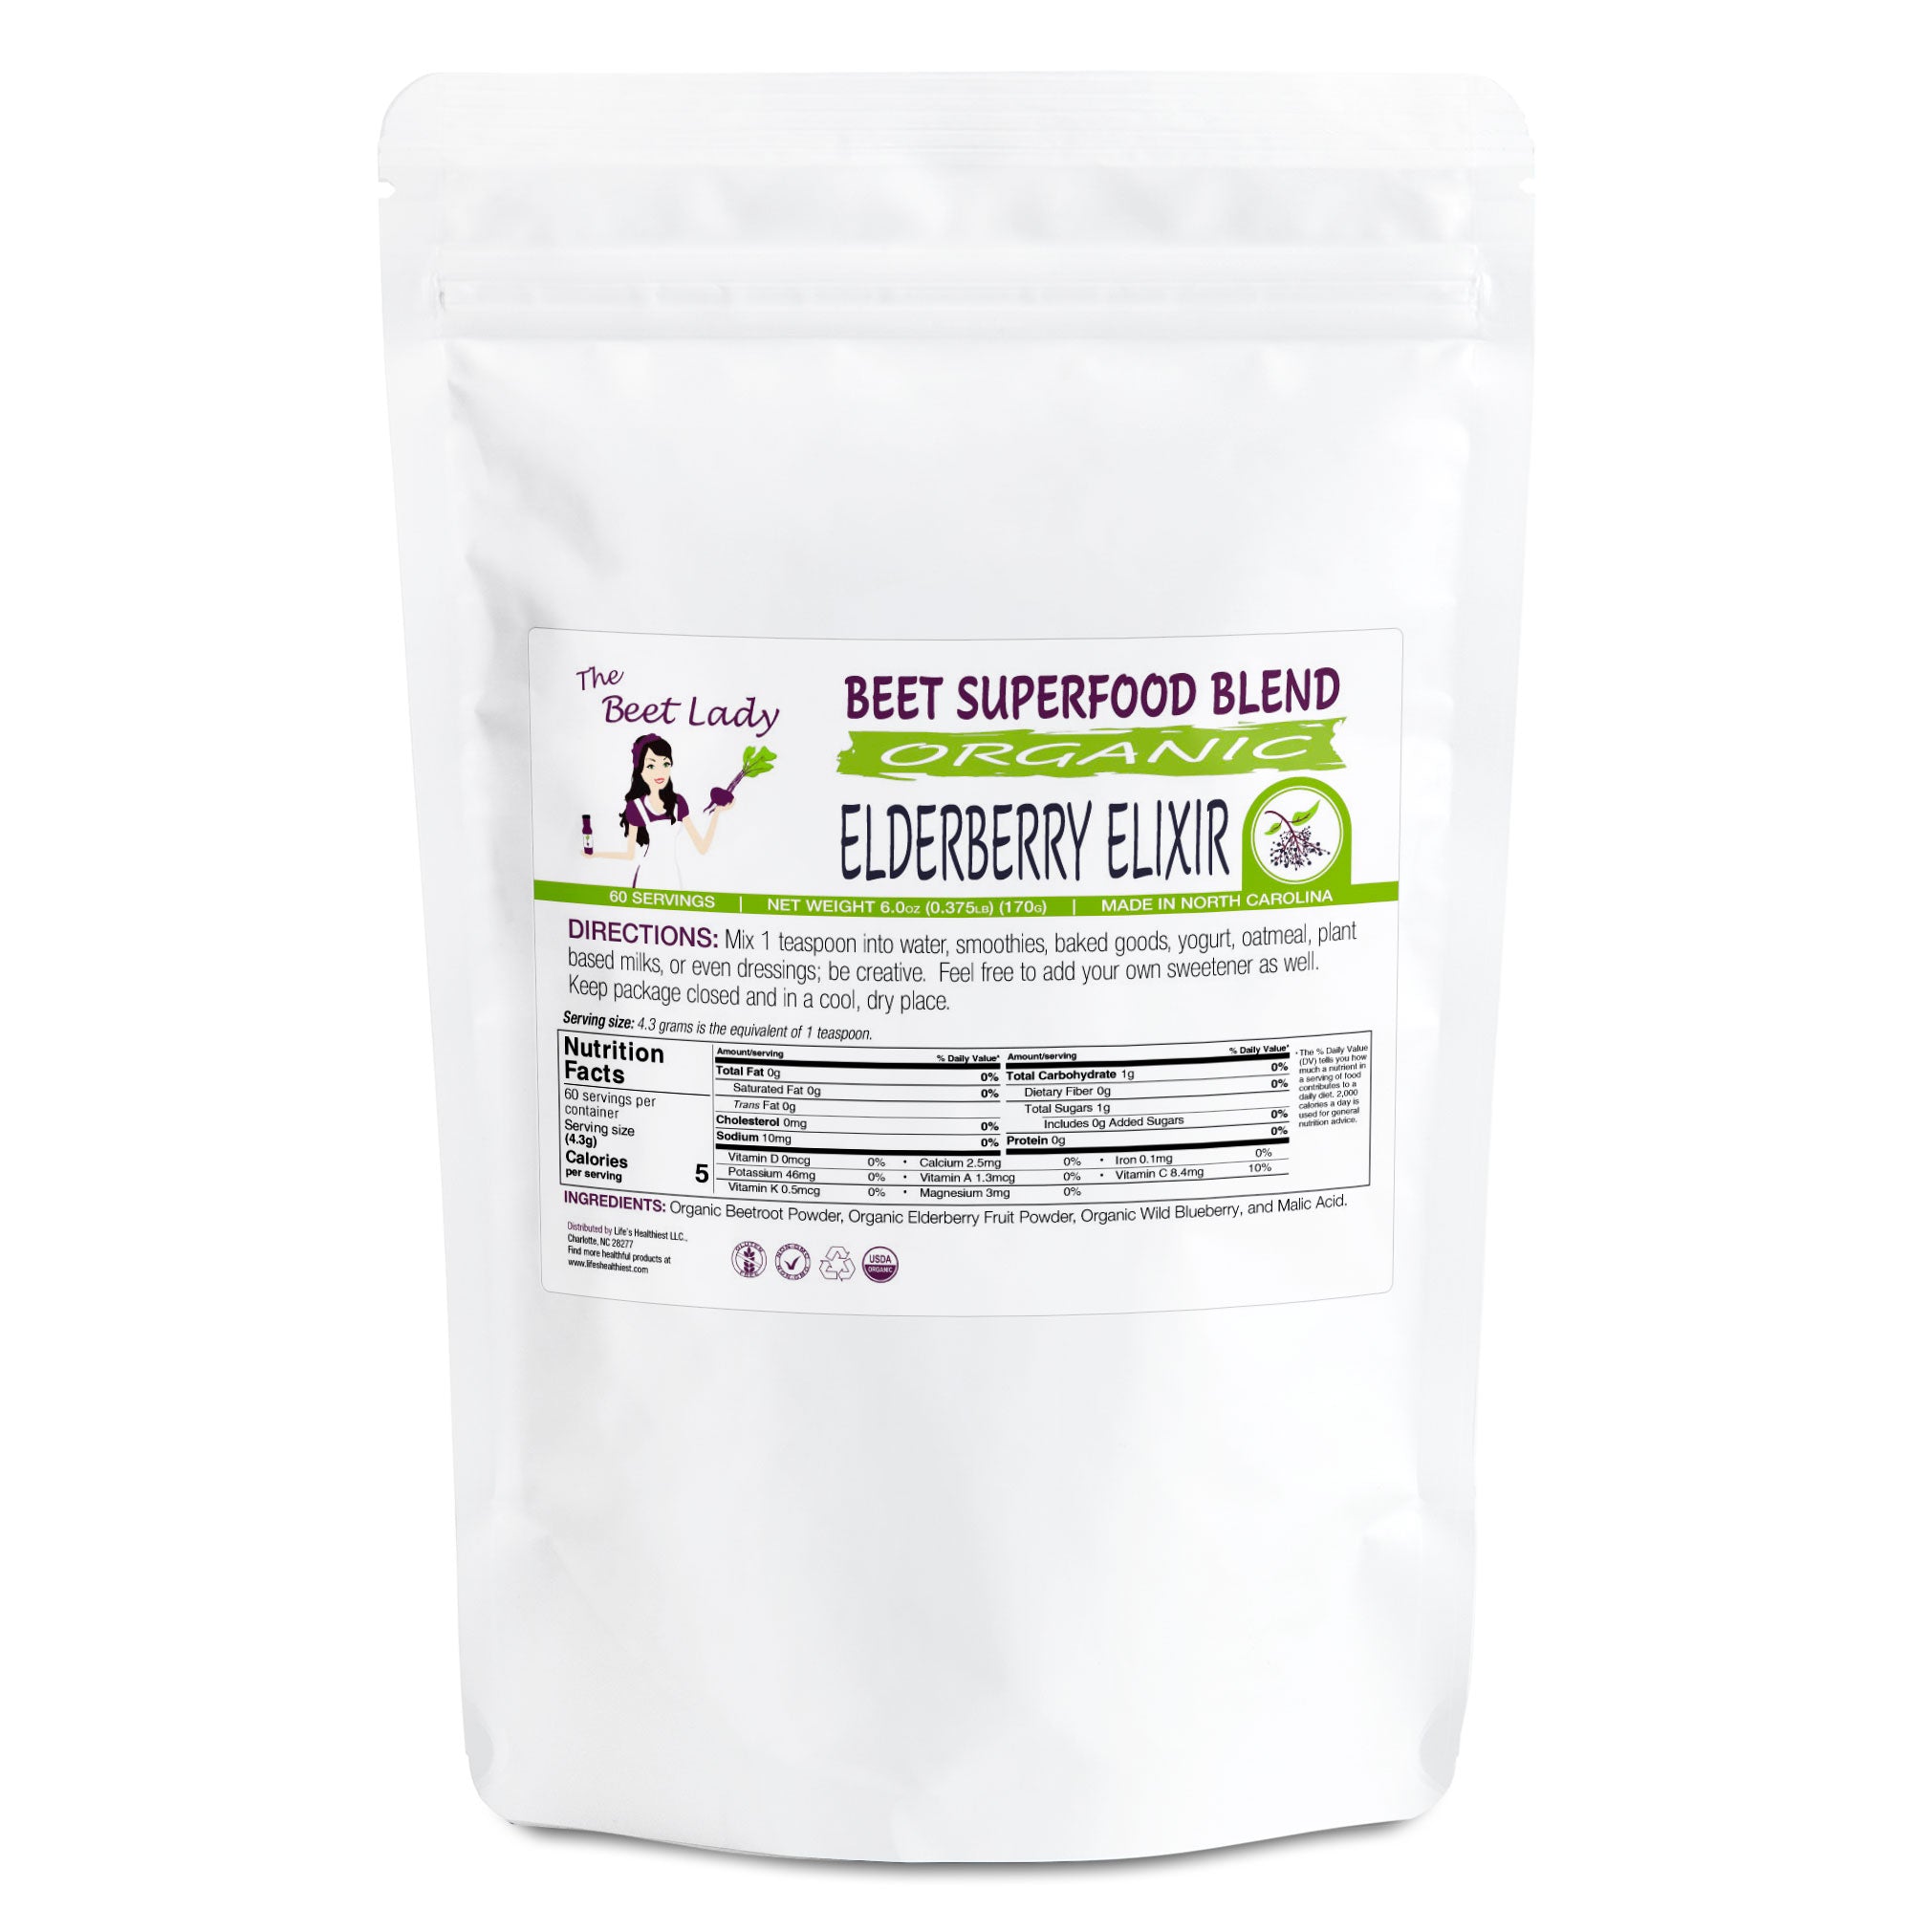 The Beet Lady ELDERBERRY ELIXIR Beet SuperFood powder blended with real fruit.  Organic, plant-based, non-GMO. 6 oz